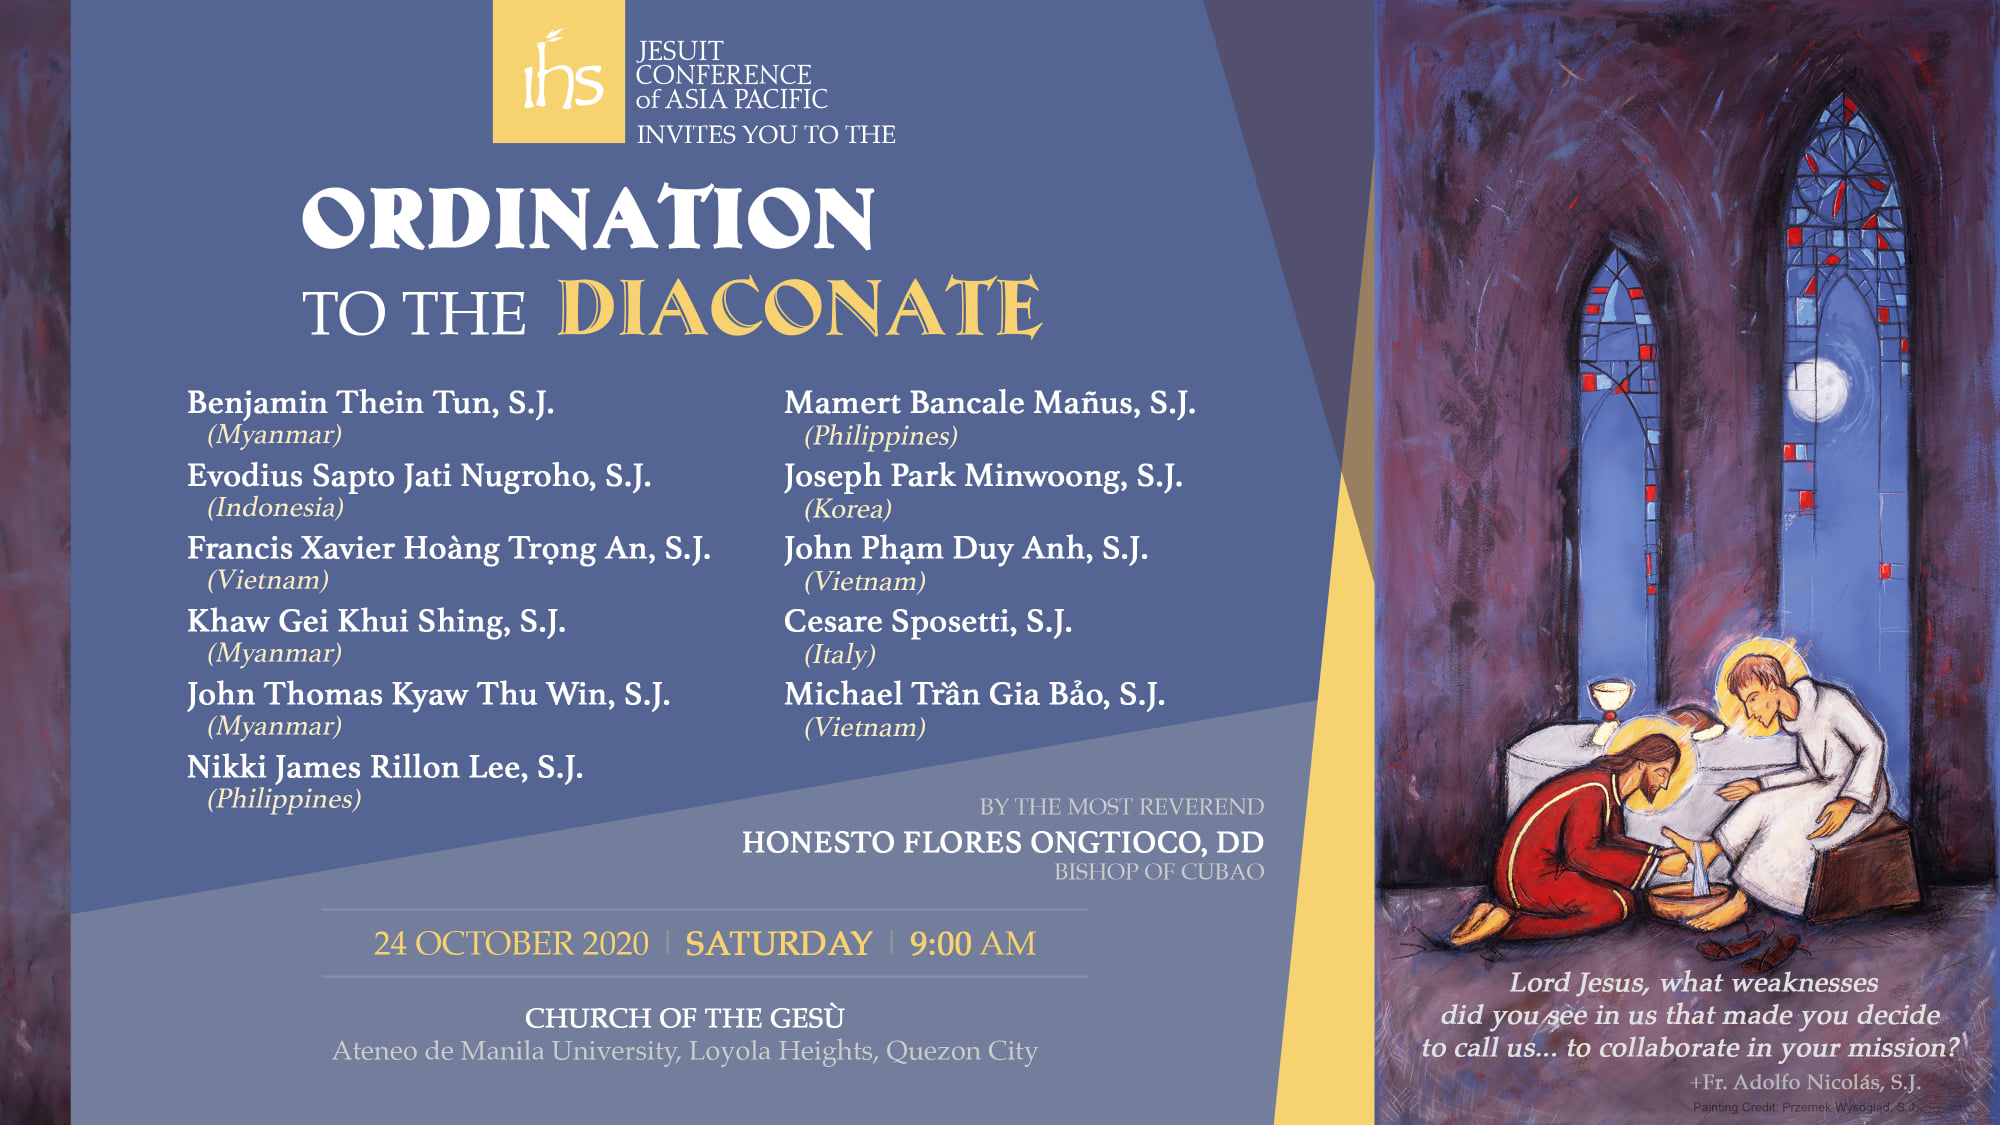 11 Jesuits to be ordained as deacons on Oct 24